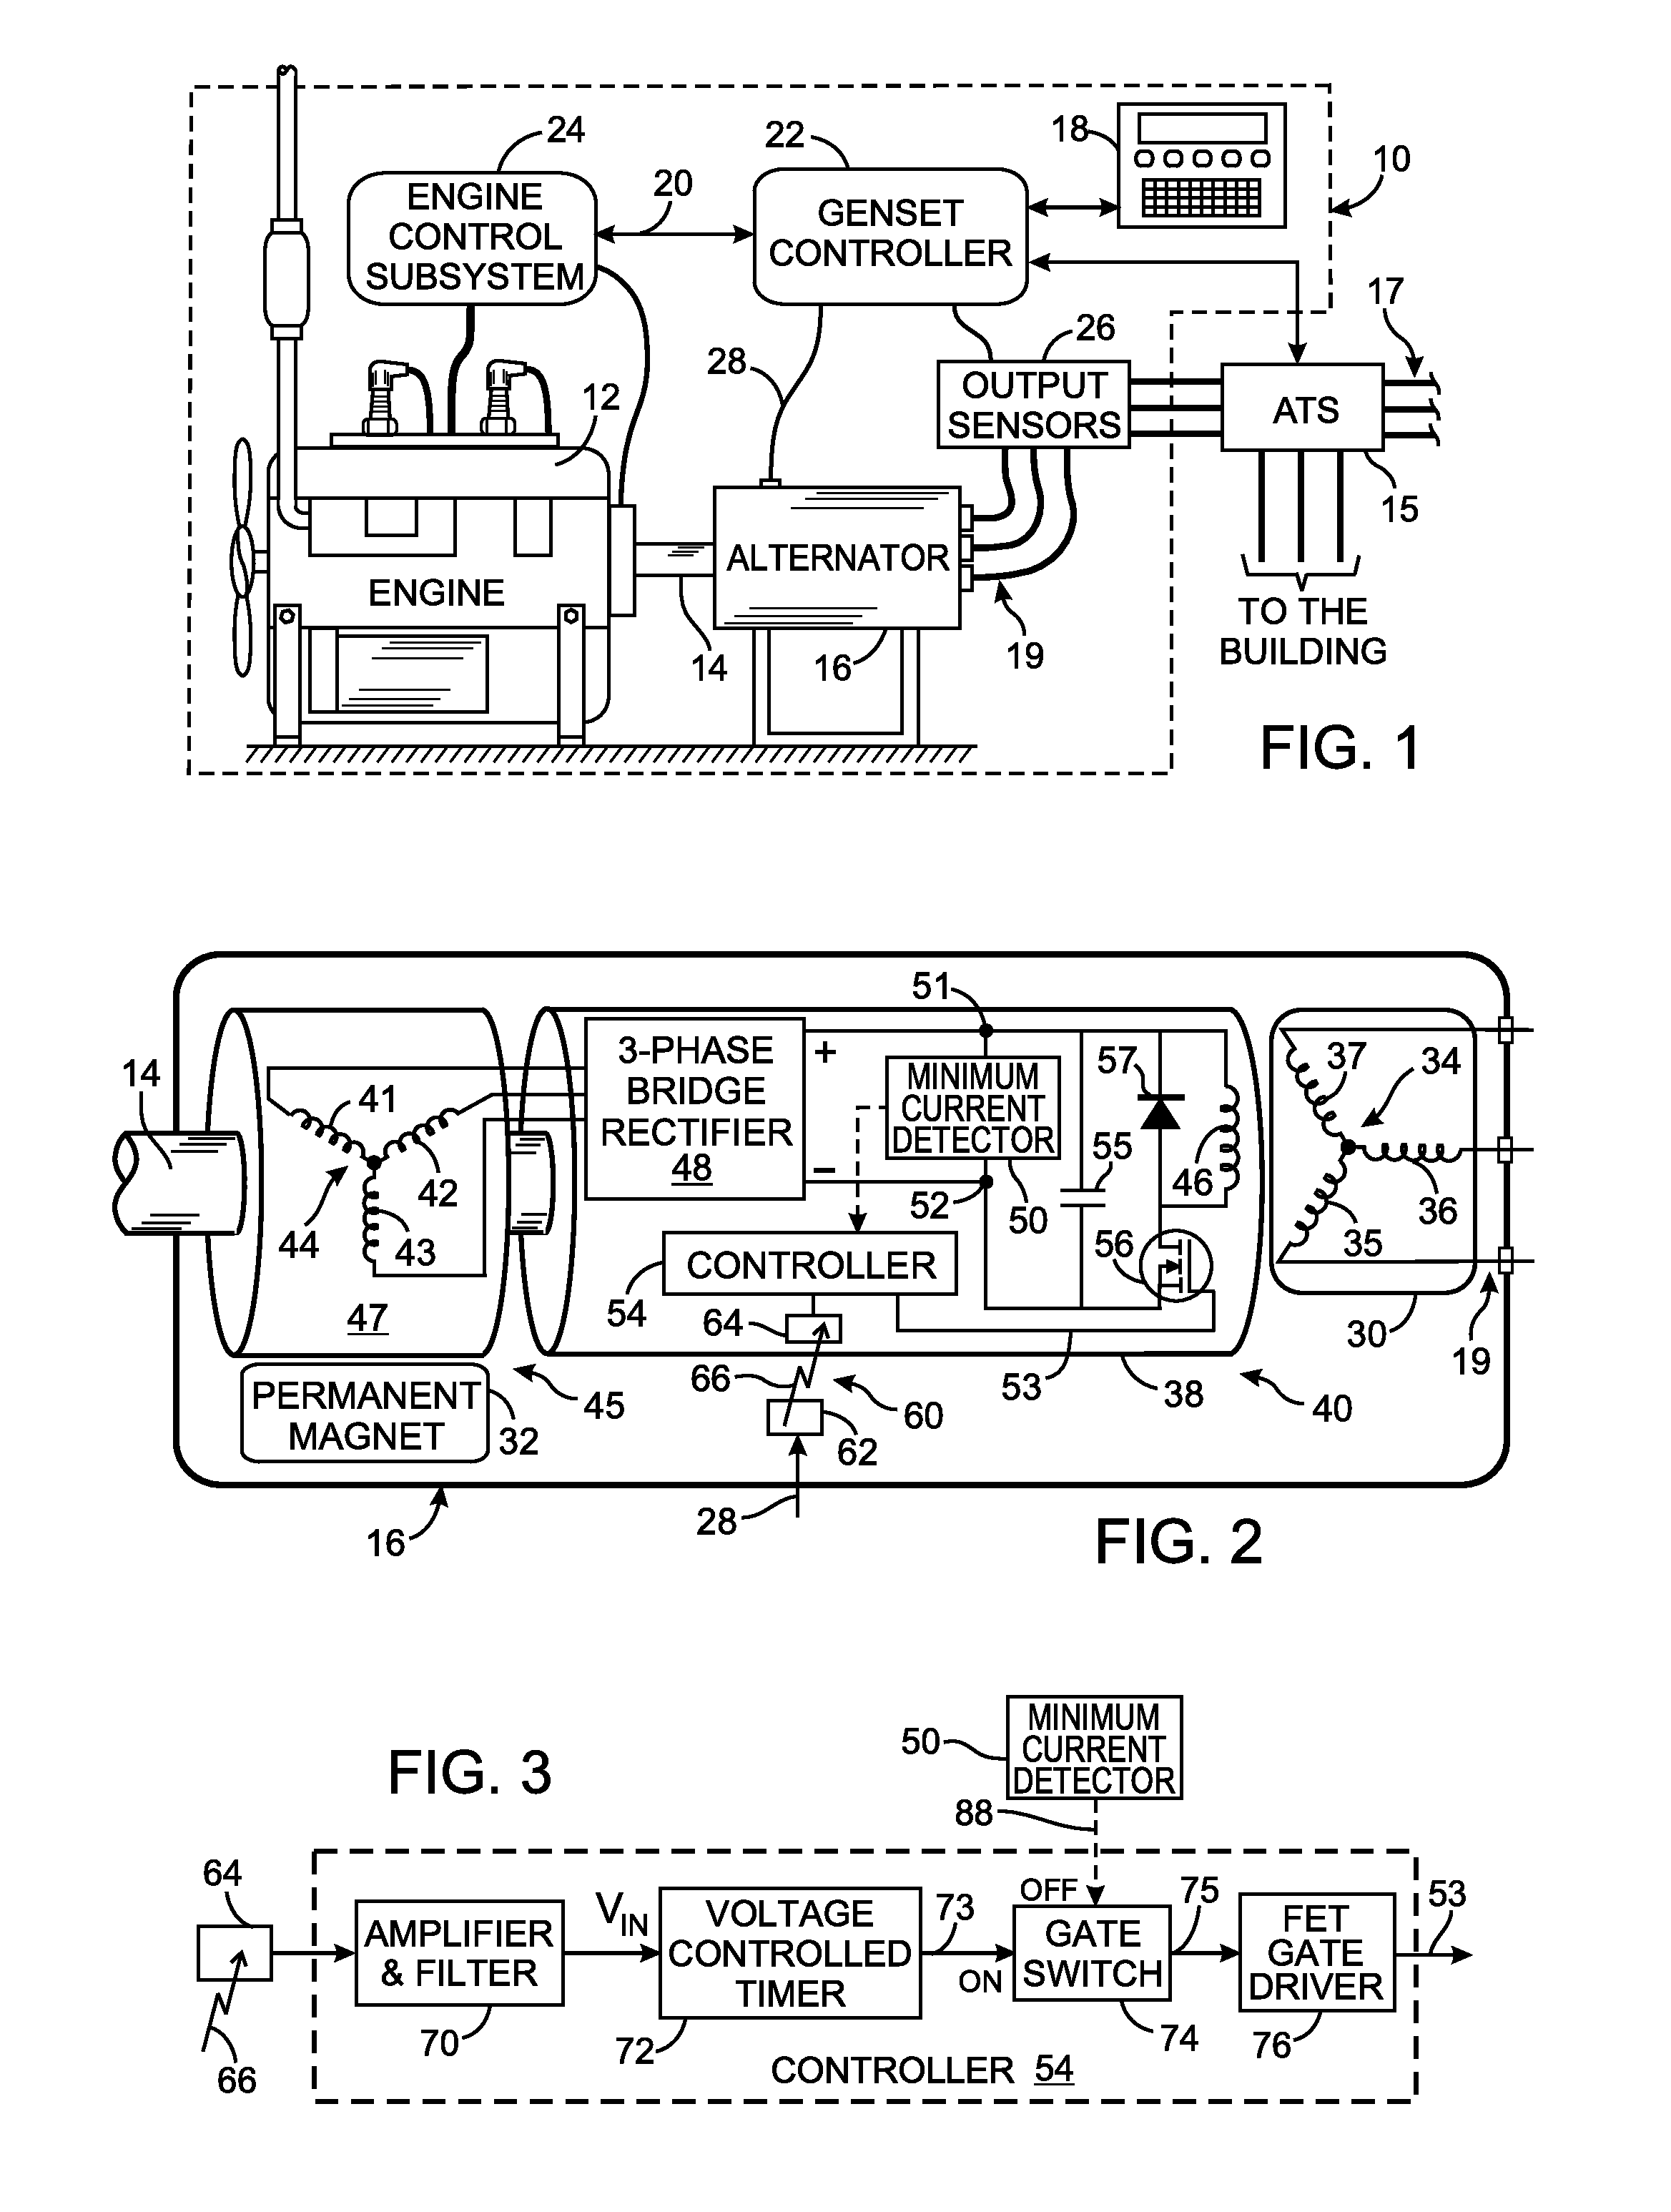 Resonant commutation system for exciting a three-phase alternator